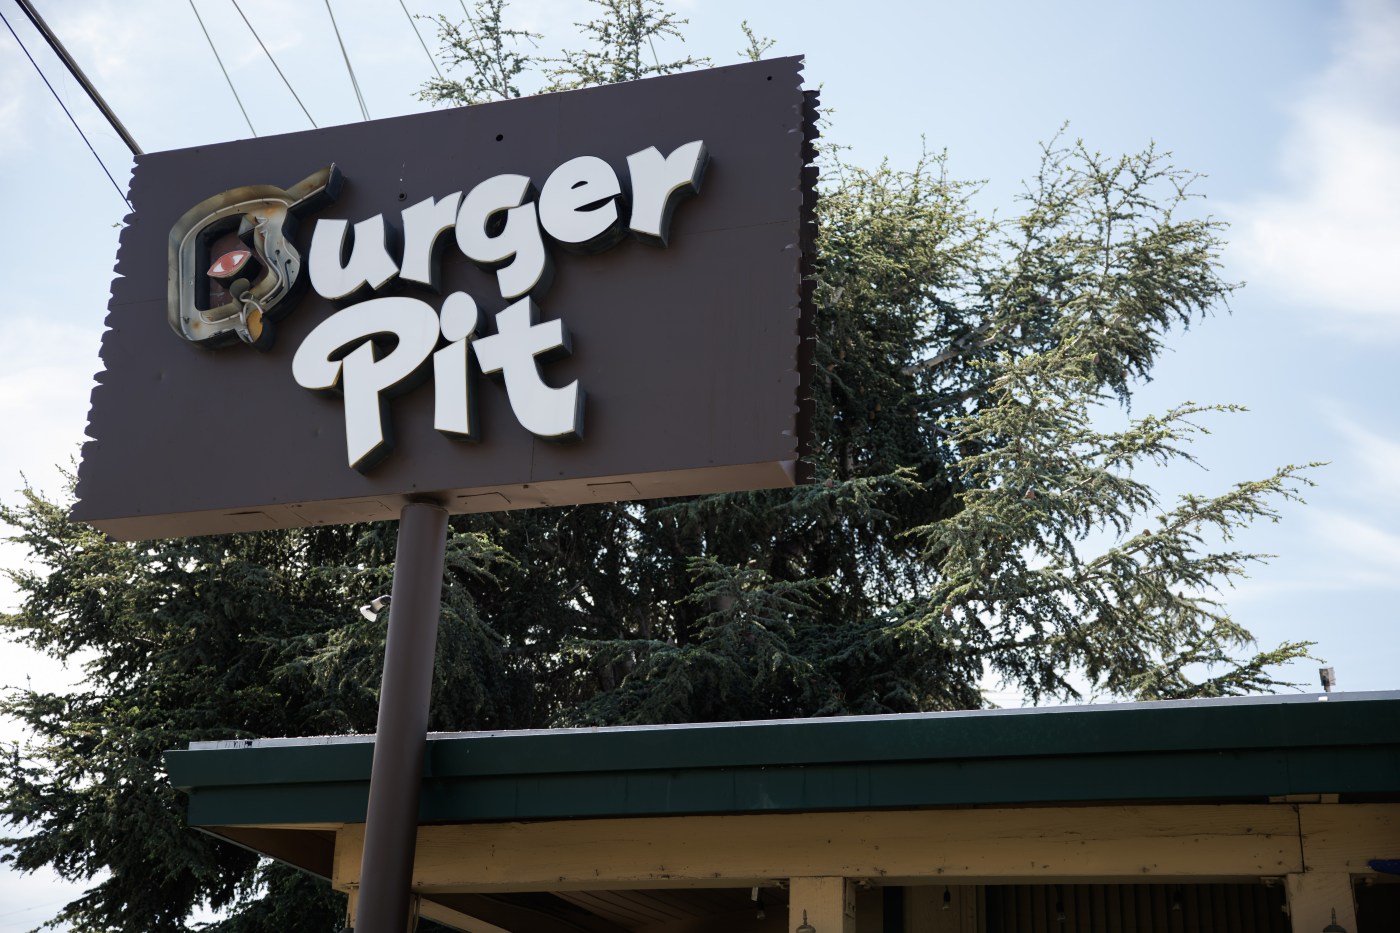 san-jose:-the-first-burger-pit-opened-in-1953.-the-last-one-is-closing-tuesday